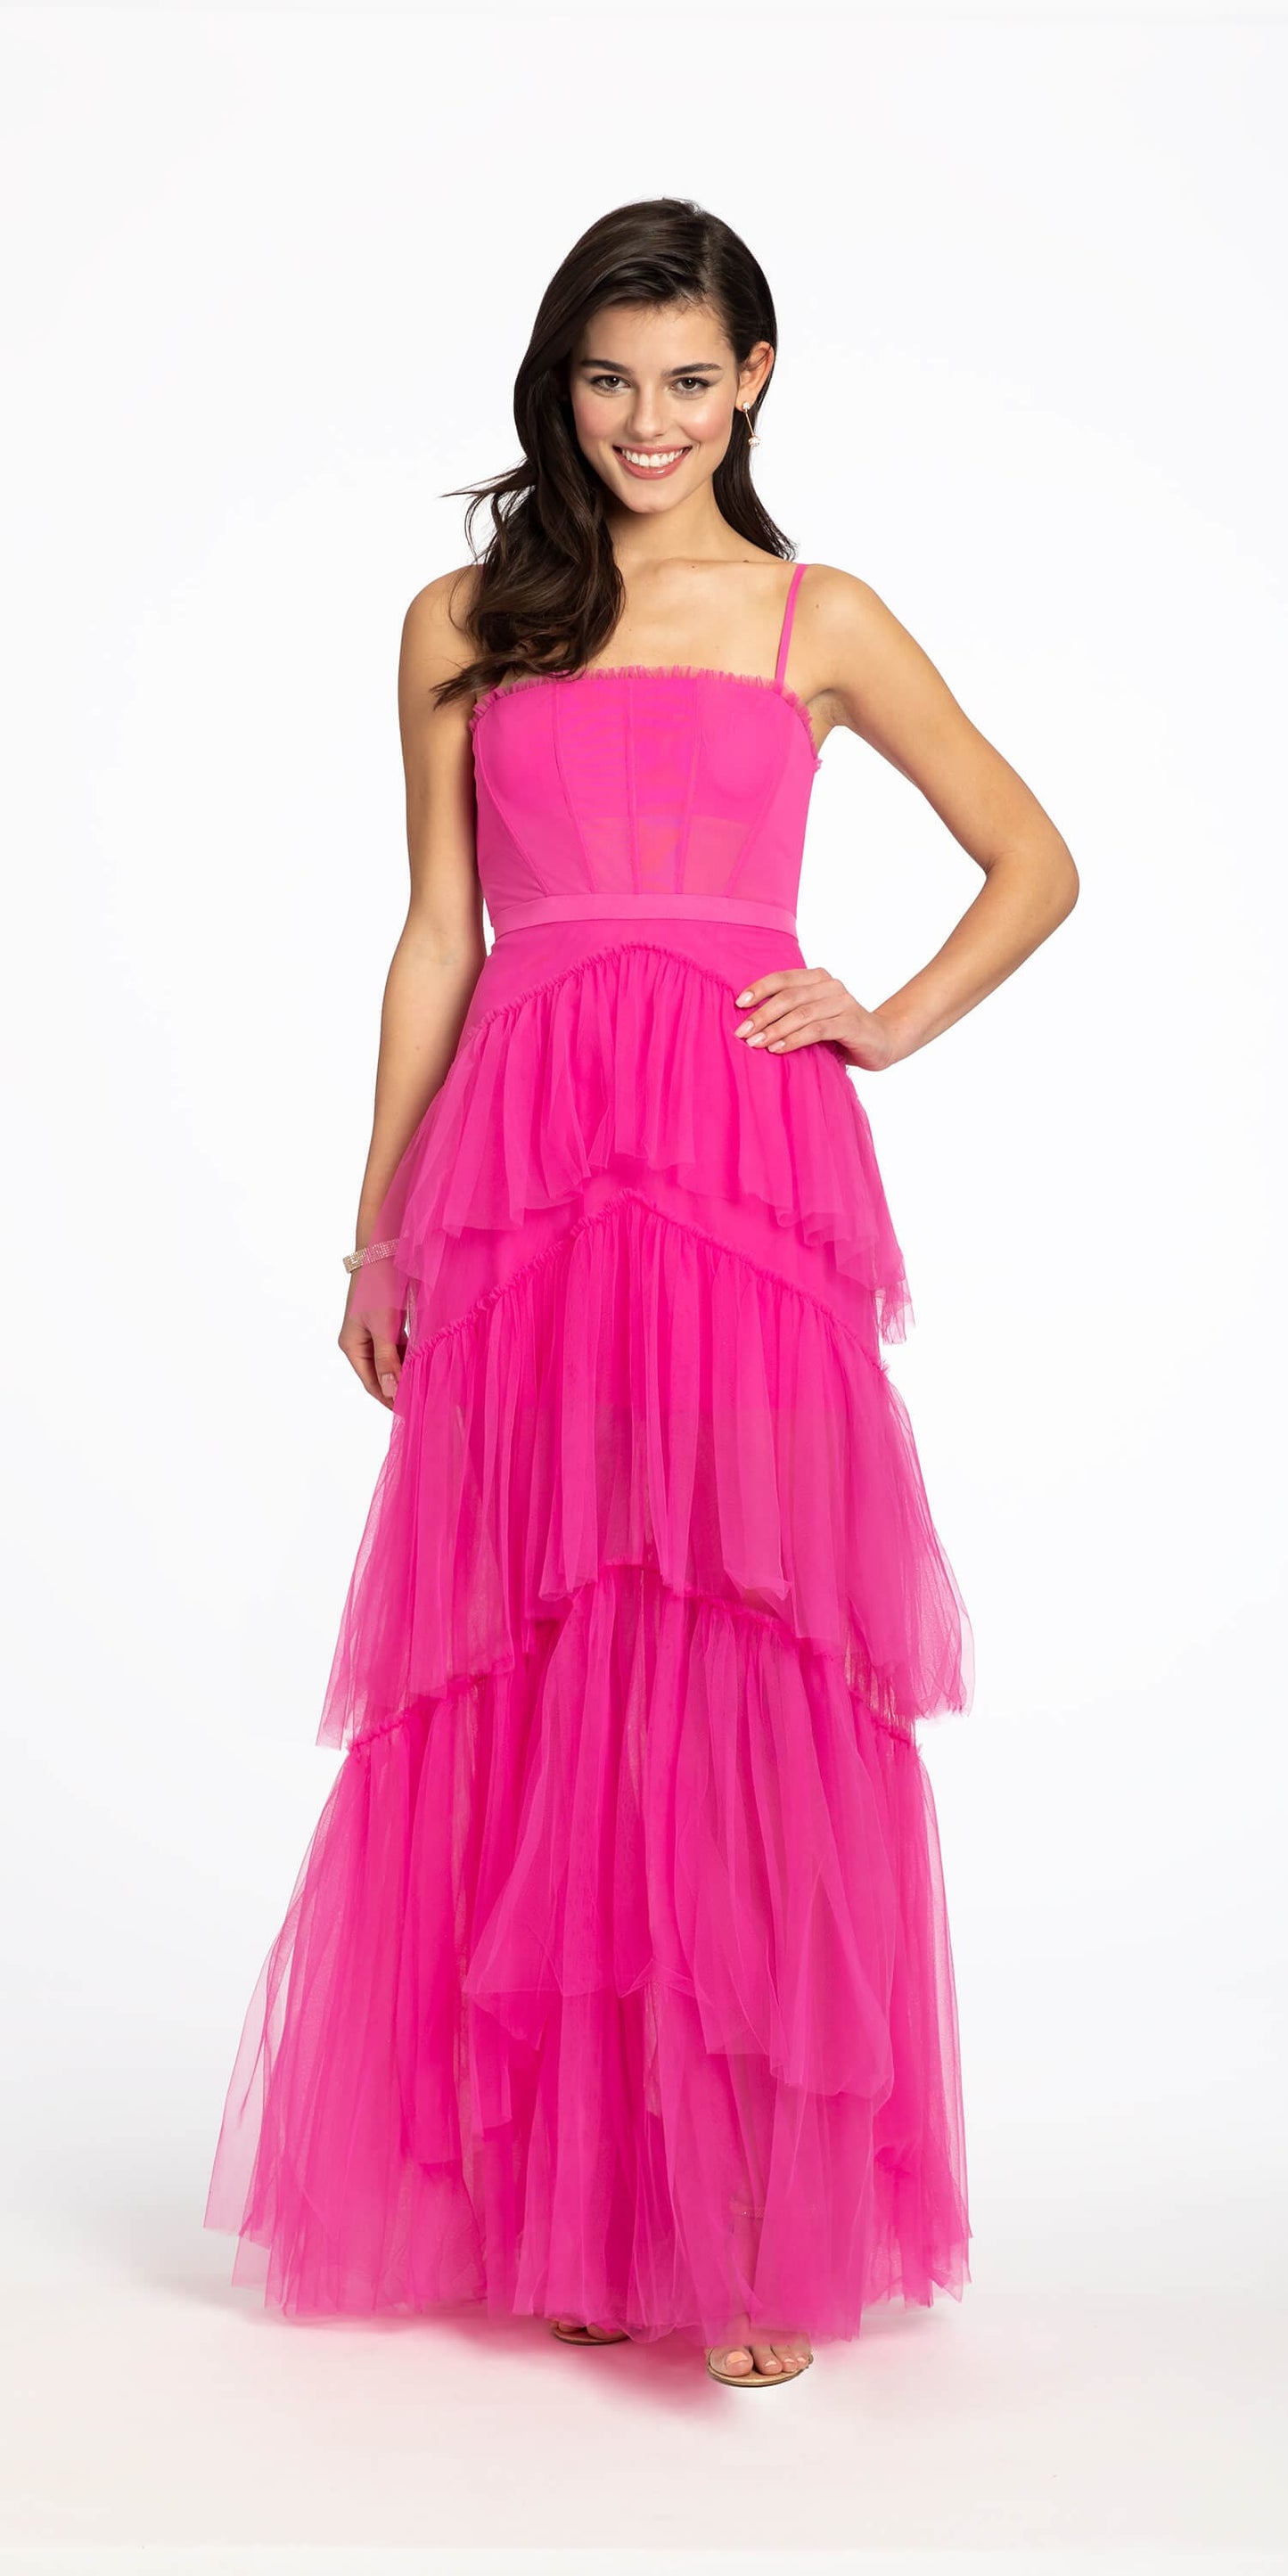 Camille La Vie Sheer Mesh Corset Tiered A Line Dress missy / 0 / bright-pink